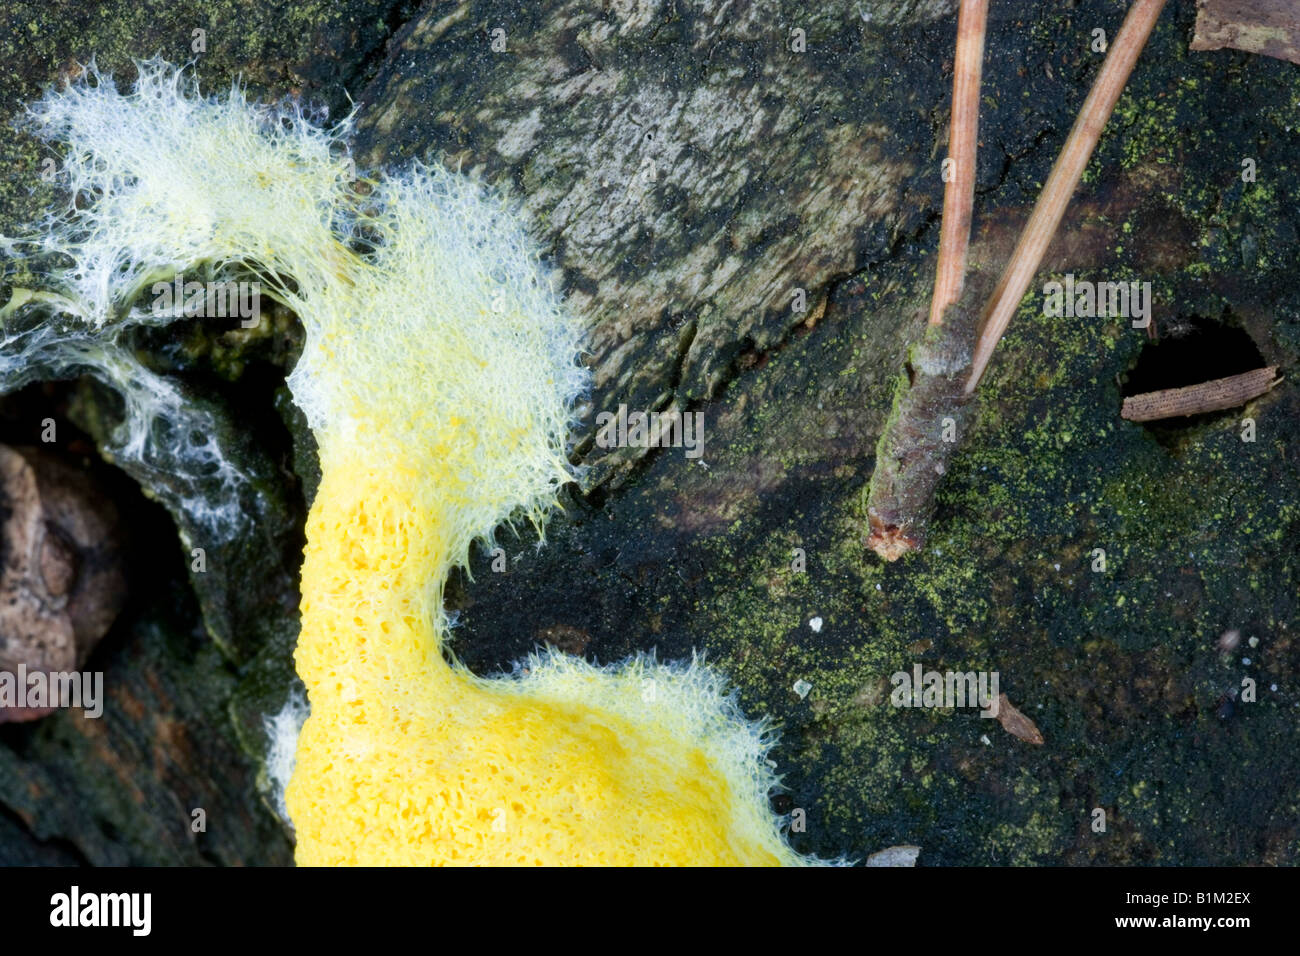 Fuligo septica myxomycete, slime mould in a pine wood Stock Photo